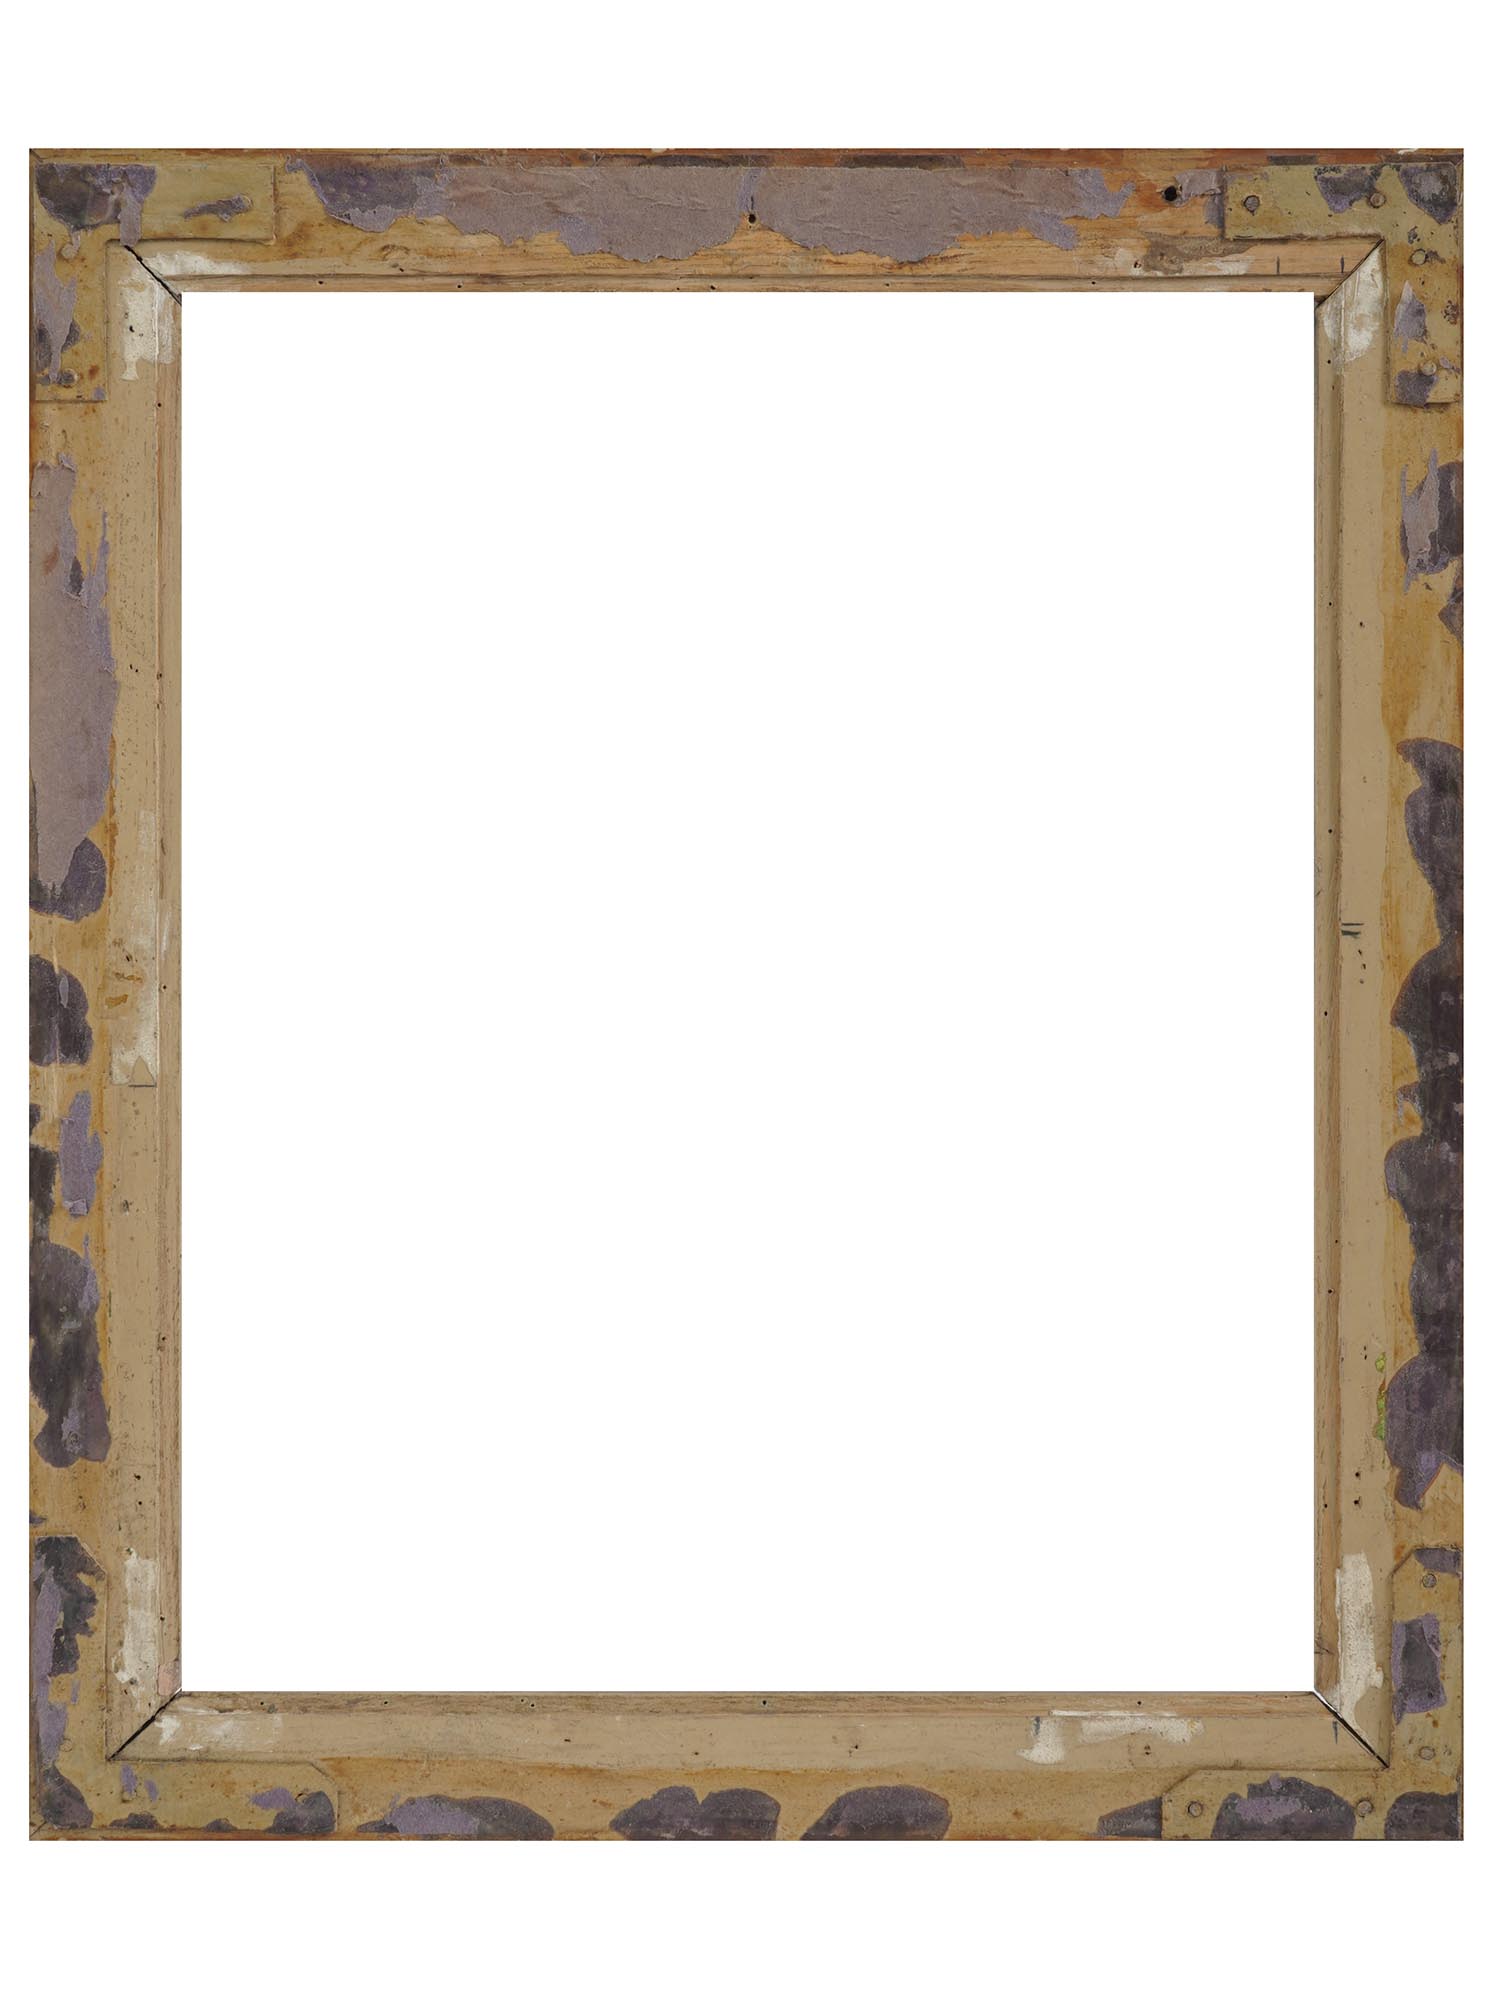 ANTIQUE AND VINTAGE GILT WOODEN PICTURE FRAMES PIC-4